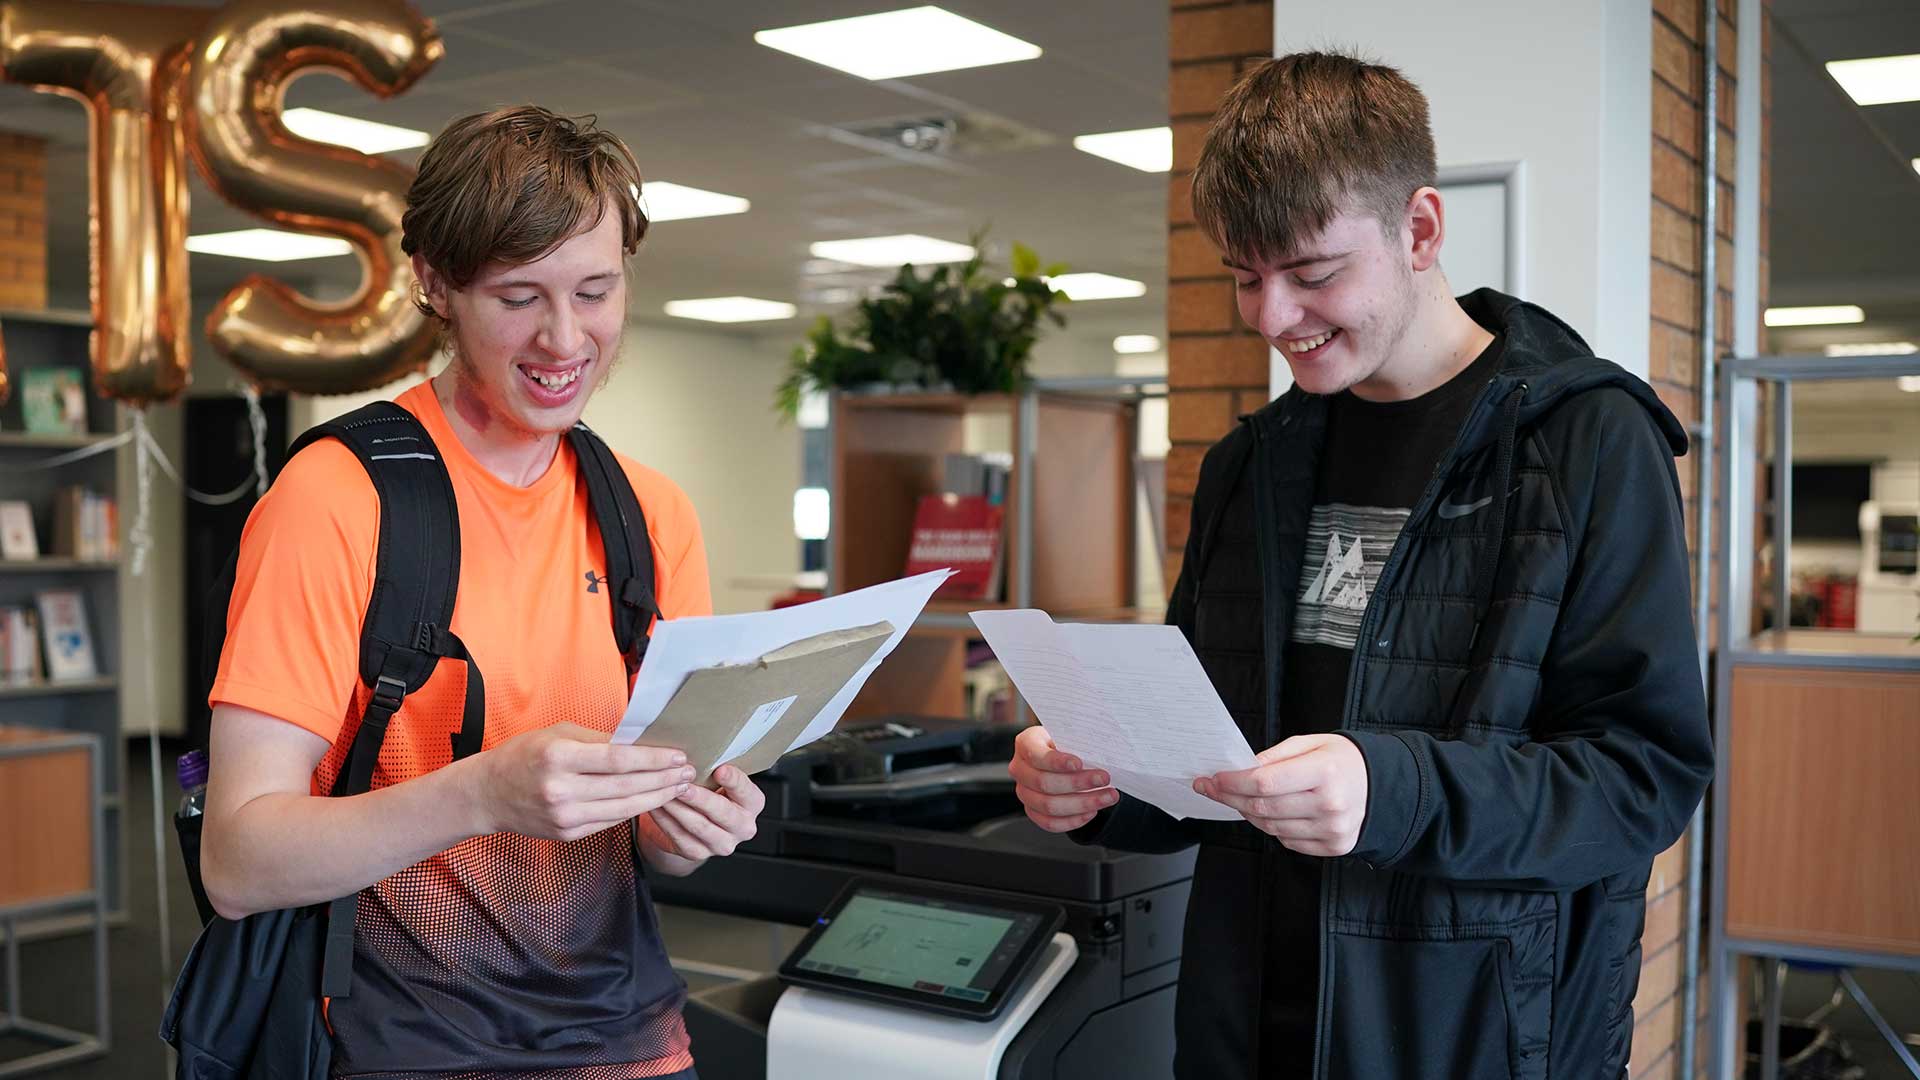 Students receiving their results.